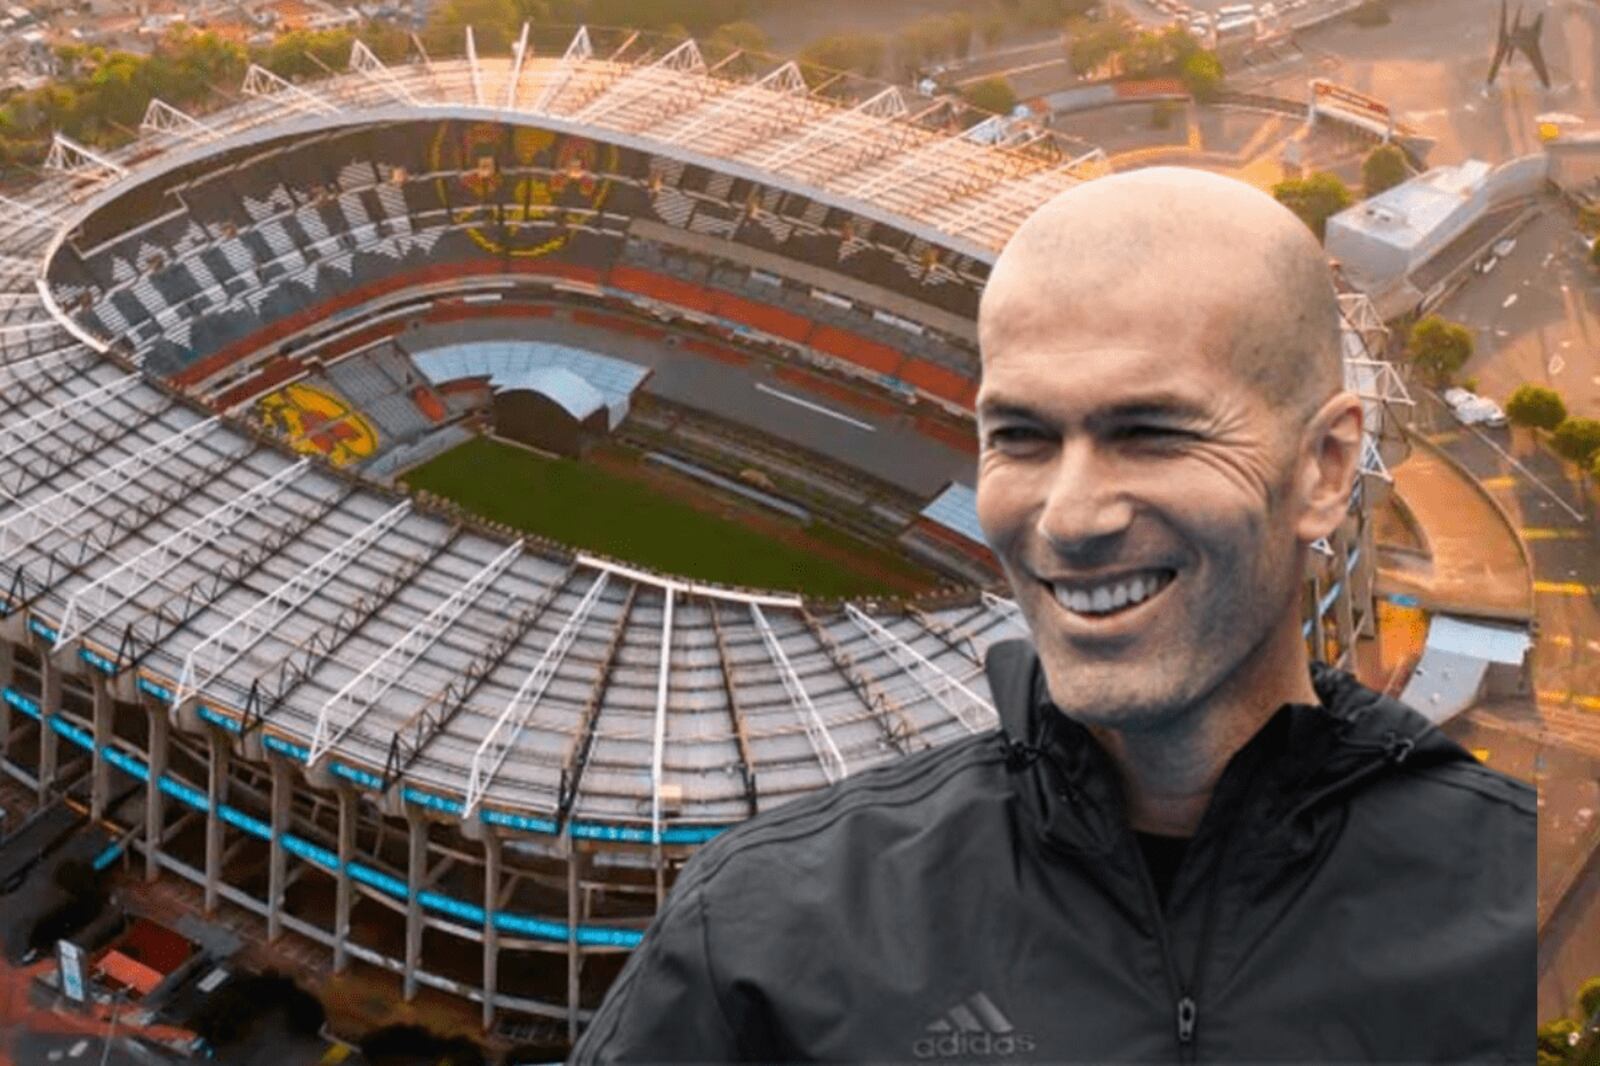 Zidane's decision to work with the Mexican National Team that has paralyzed the world